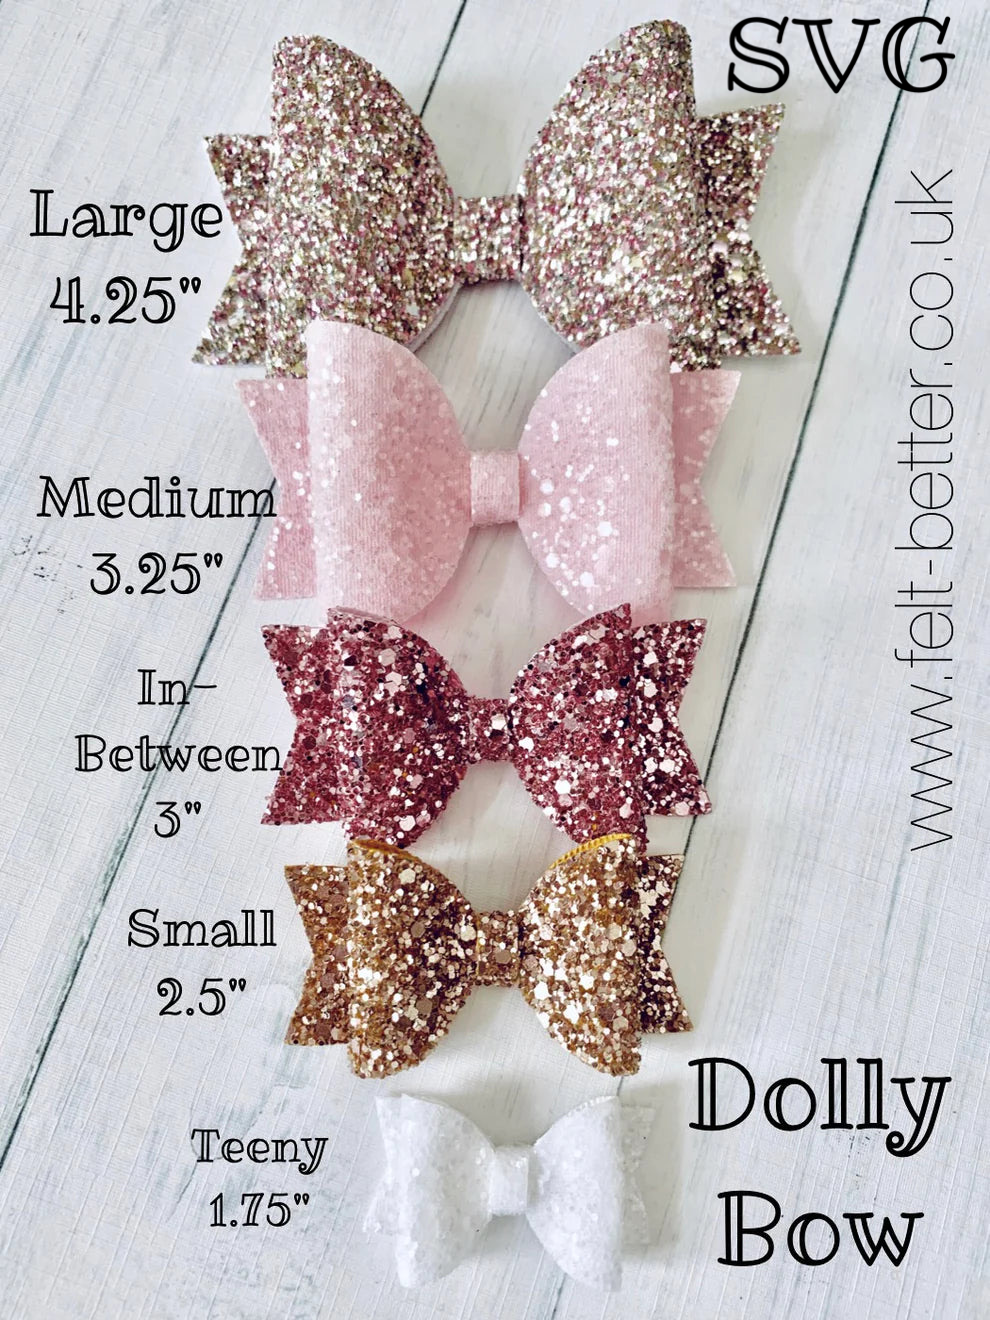 Dolly Bow SVG Cut Files